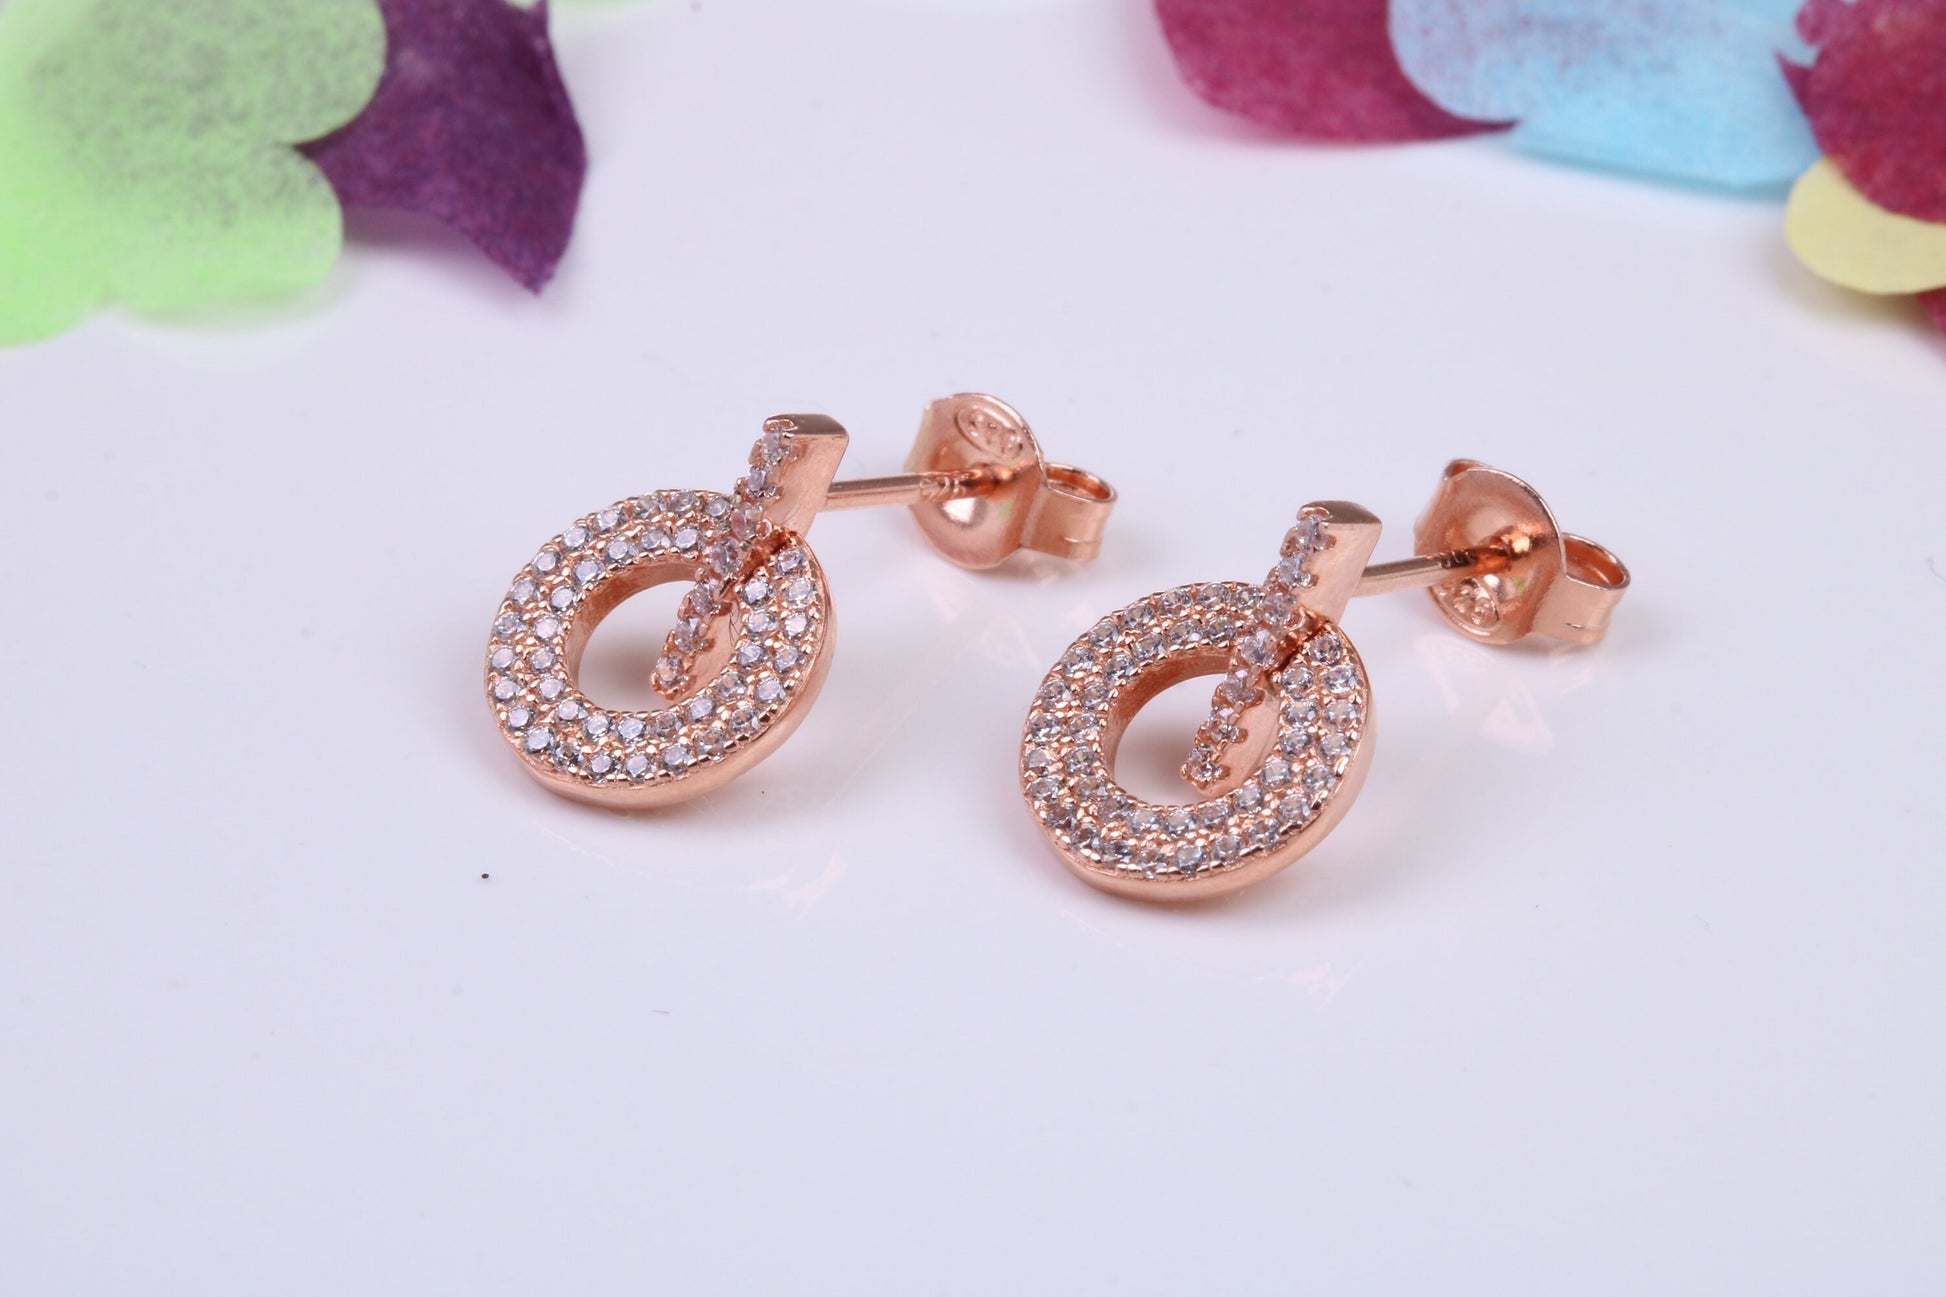 10 mm Round Cluster Cubic Zirconia set Dropper Earrings, Very Dressy, Made from Solid 925 Grade Sterling Silver, Rose Gold Plated